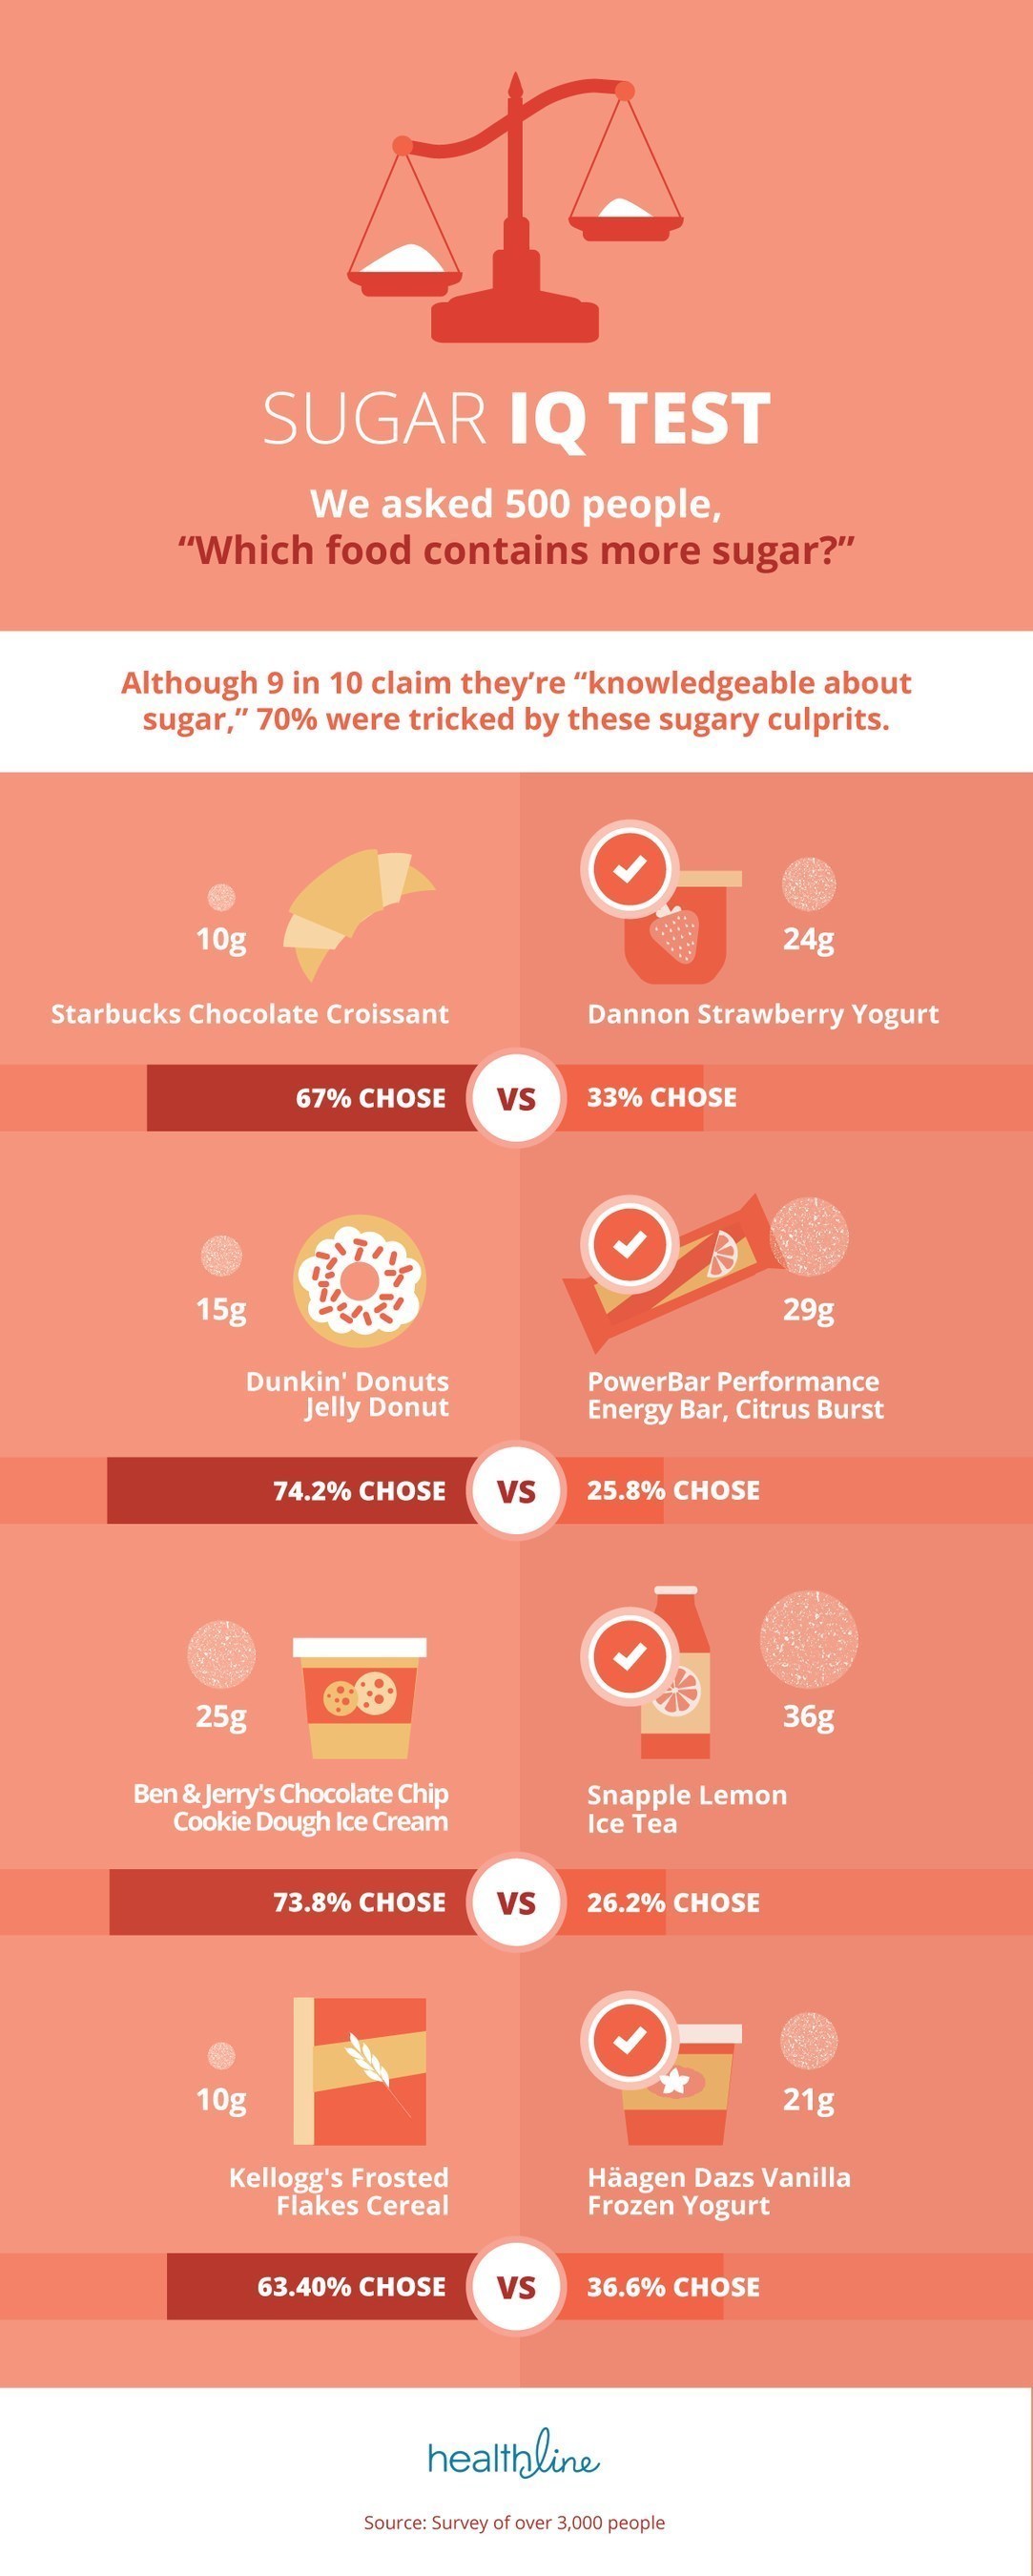 Our survey found that while at least one-third check sugar in foods typically associated with high-sugar content, such as cookies or frozen desserts, respondents are less likely to check hidden sugars in dressings, sauces, or condiments. The survey showed that 2 in 3 guess wrong on which popular food items contain more sugar.